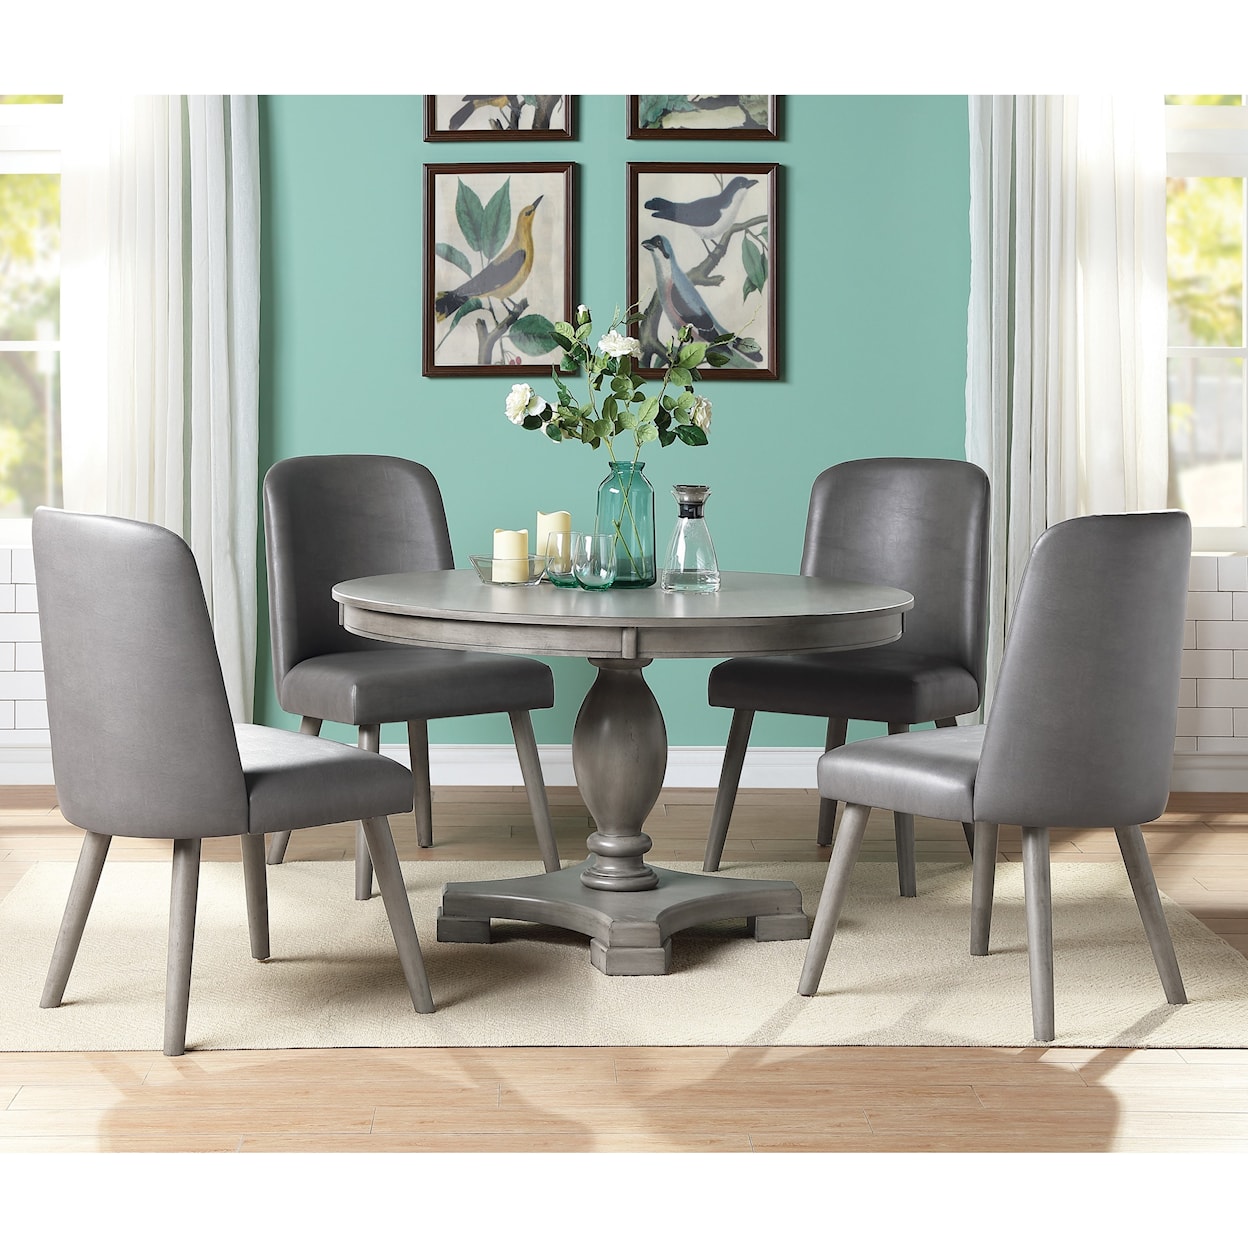 Acme Furniture Waylon 5-Piece Table and Chair Set